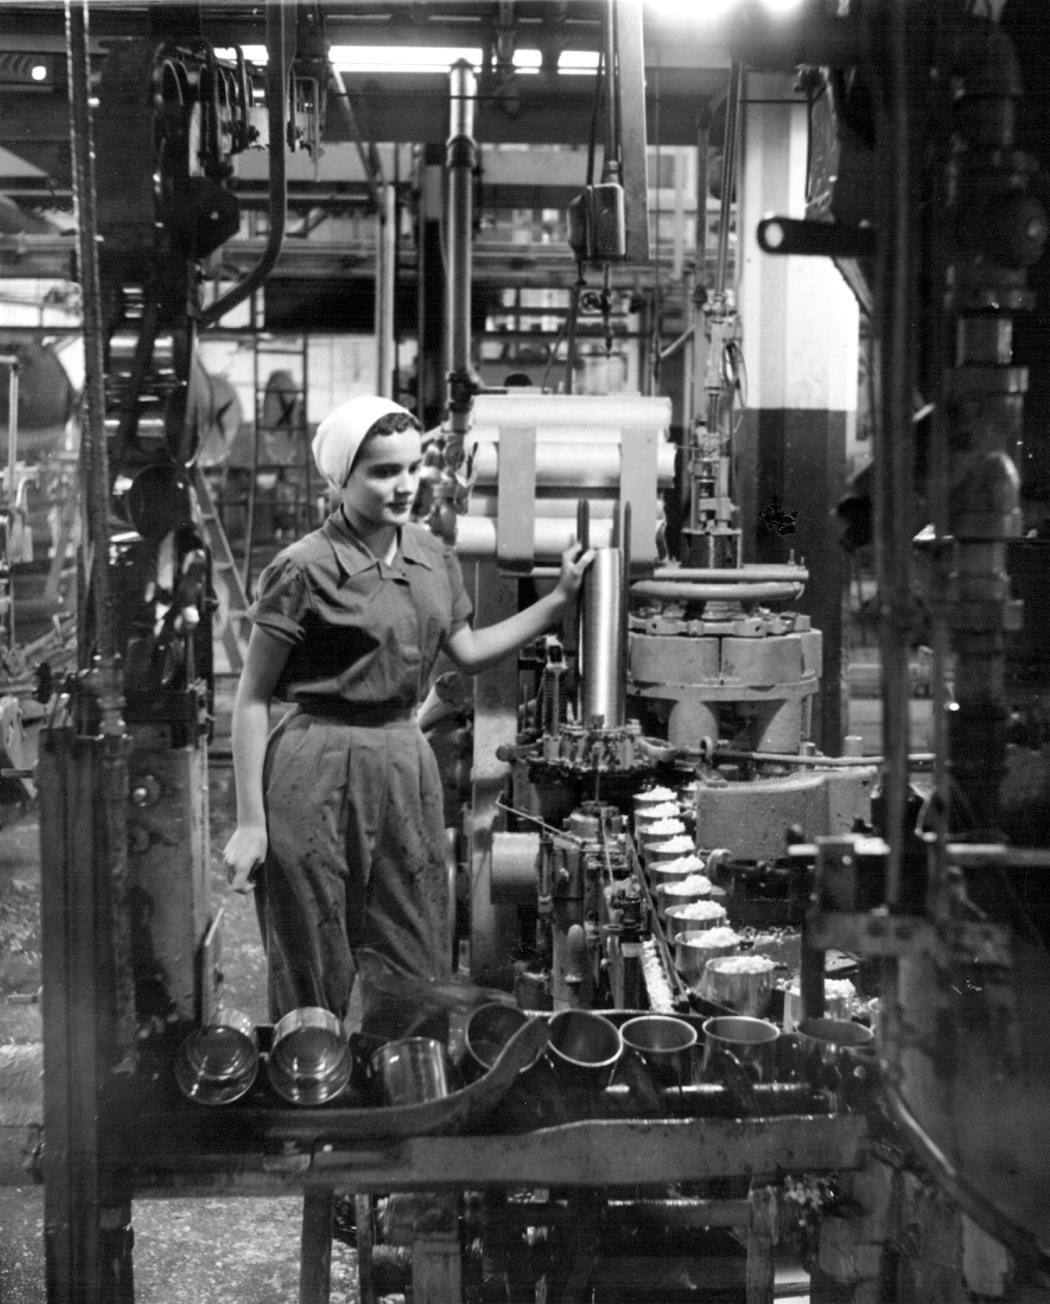 A worker in Le Sueur watched over corn coming off the Green Giant canning line in 1954.